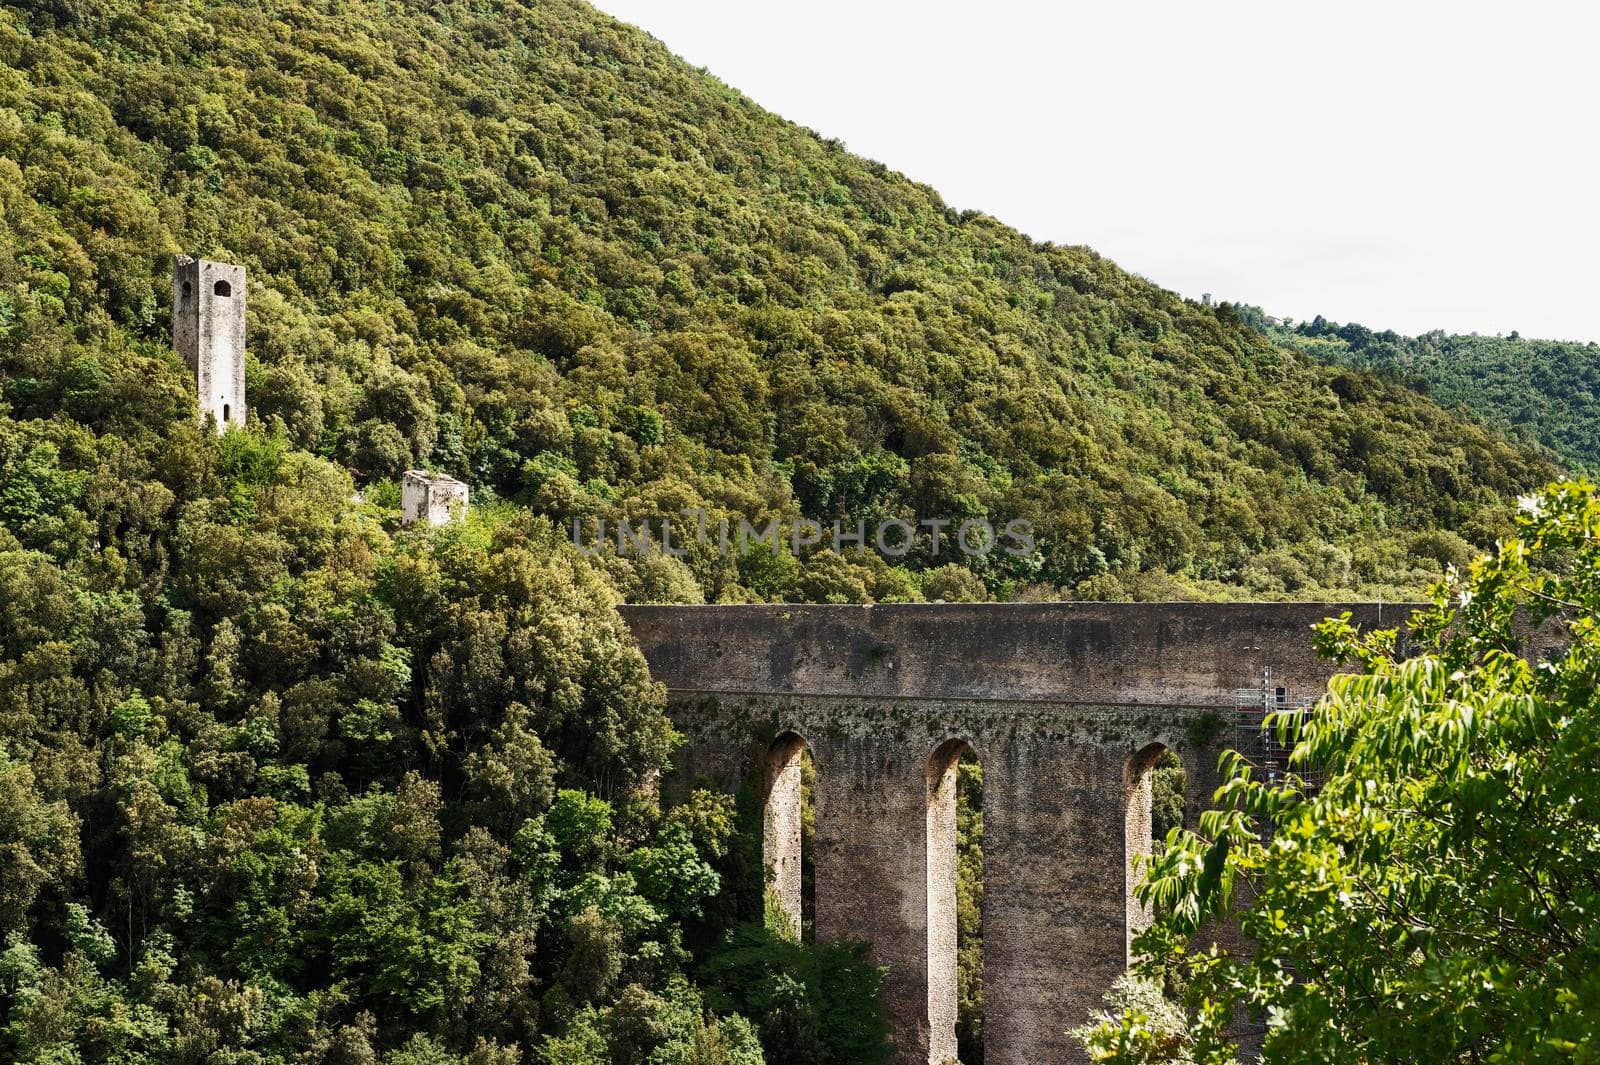 Spoleto , Italy , Ponte delle Torri , arched  bridge of towers  in limestone , it worked as aqueduct and bridge